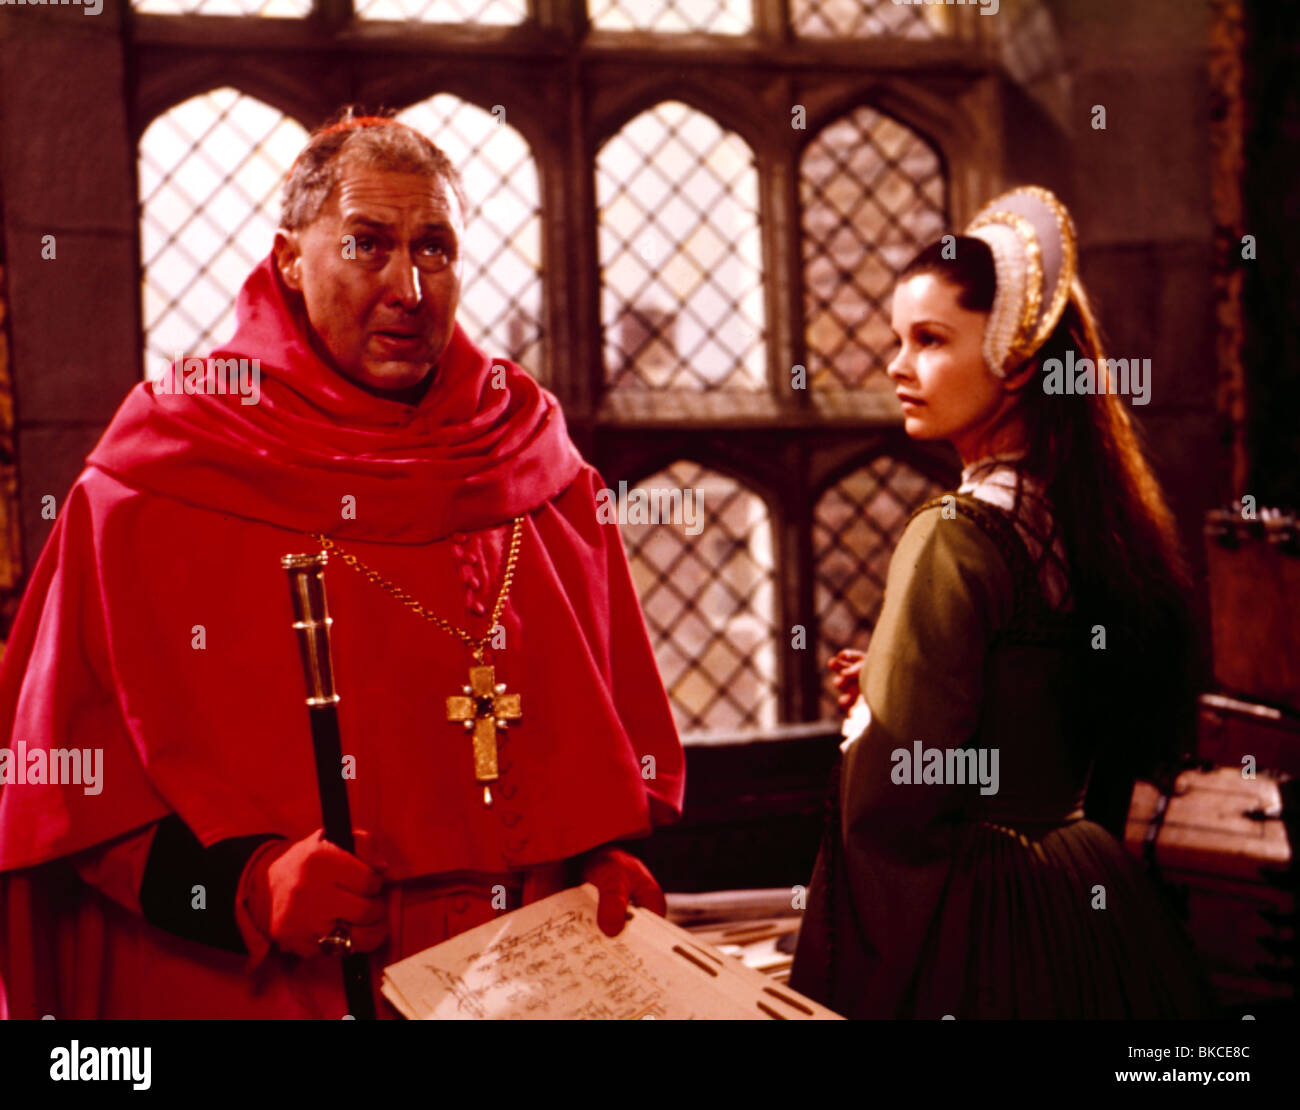 ANNE OF THE THOUSAND DAYS (1969) ANTHONY QUAYLE, GENEVIEVE BUJOLD ATDY 001OS Stock Photo